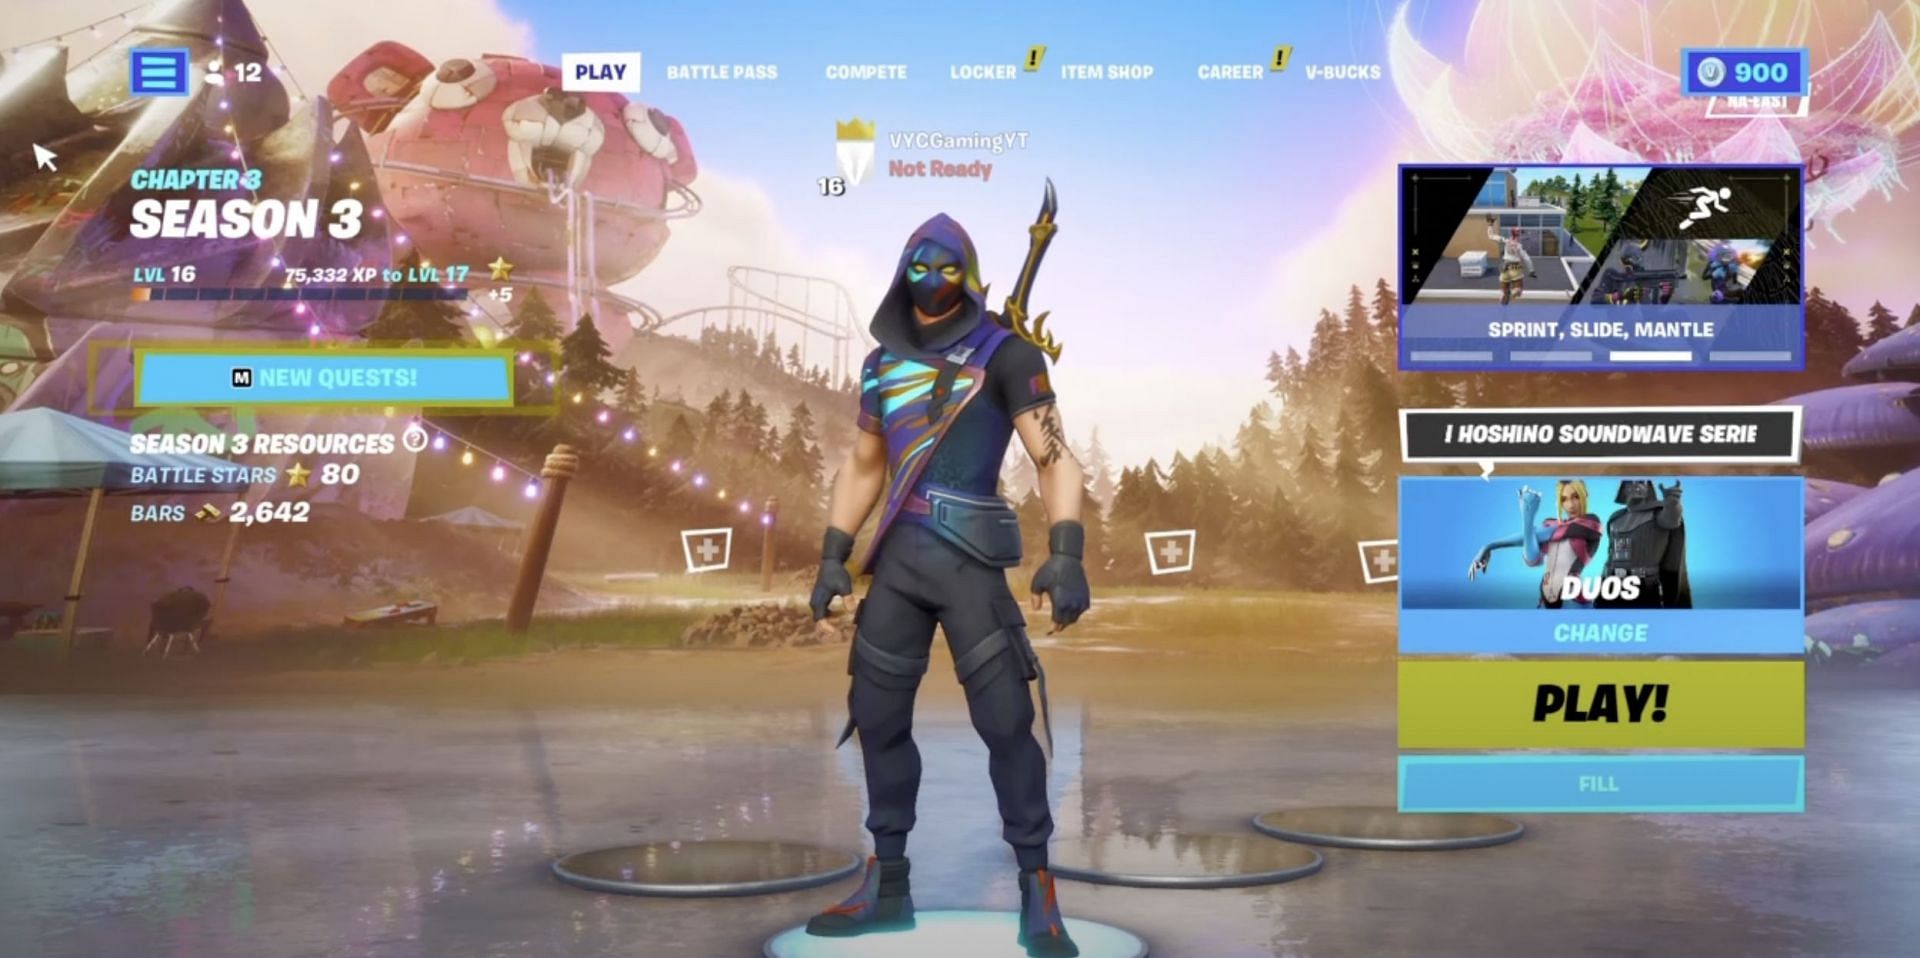 Friend Request bug in Fortnite Chapter 3 Season 3 fixed (Image via VYC Gaming/YouTube)